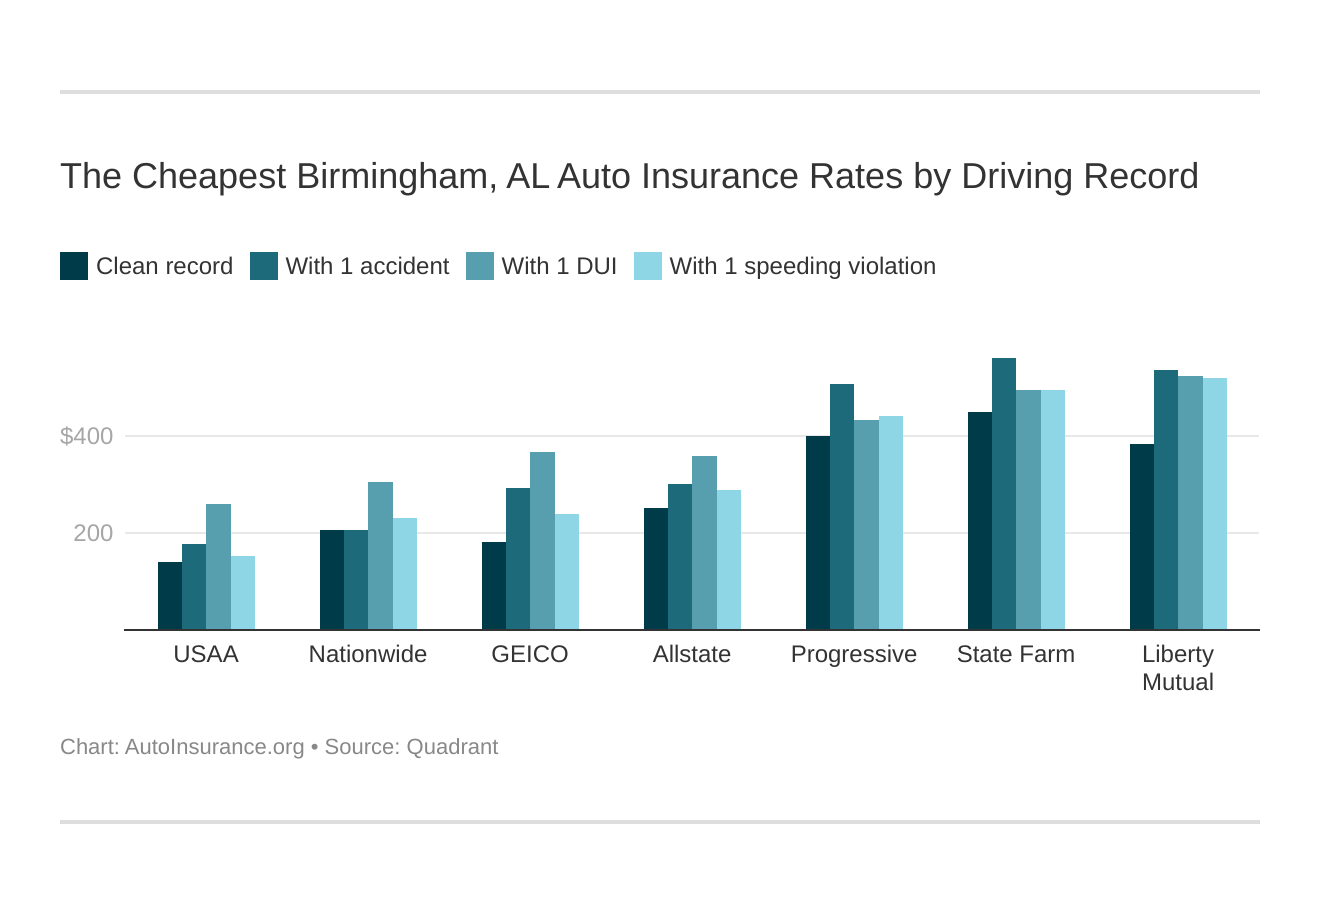 The Cheapest Birmingham, AL Auto Insurance Rates by Driving Record